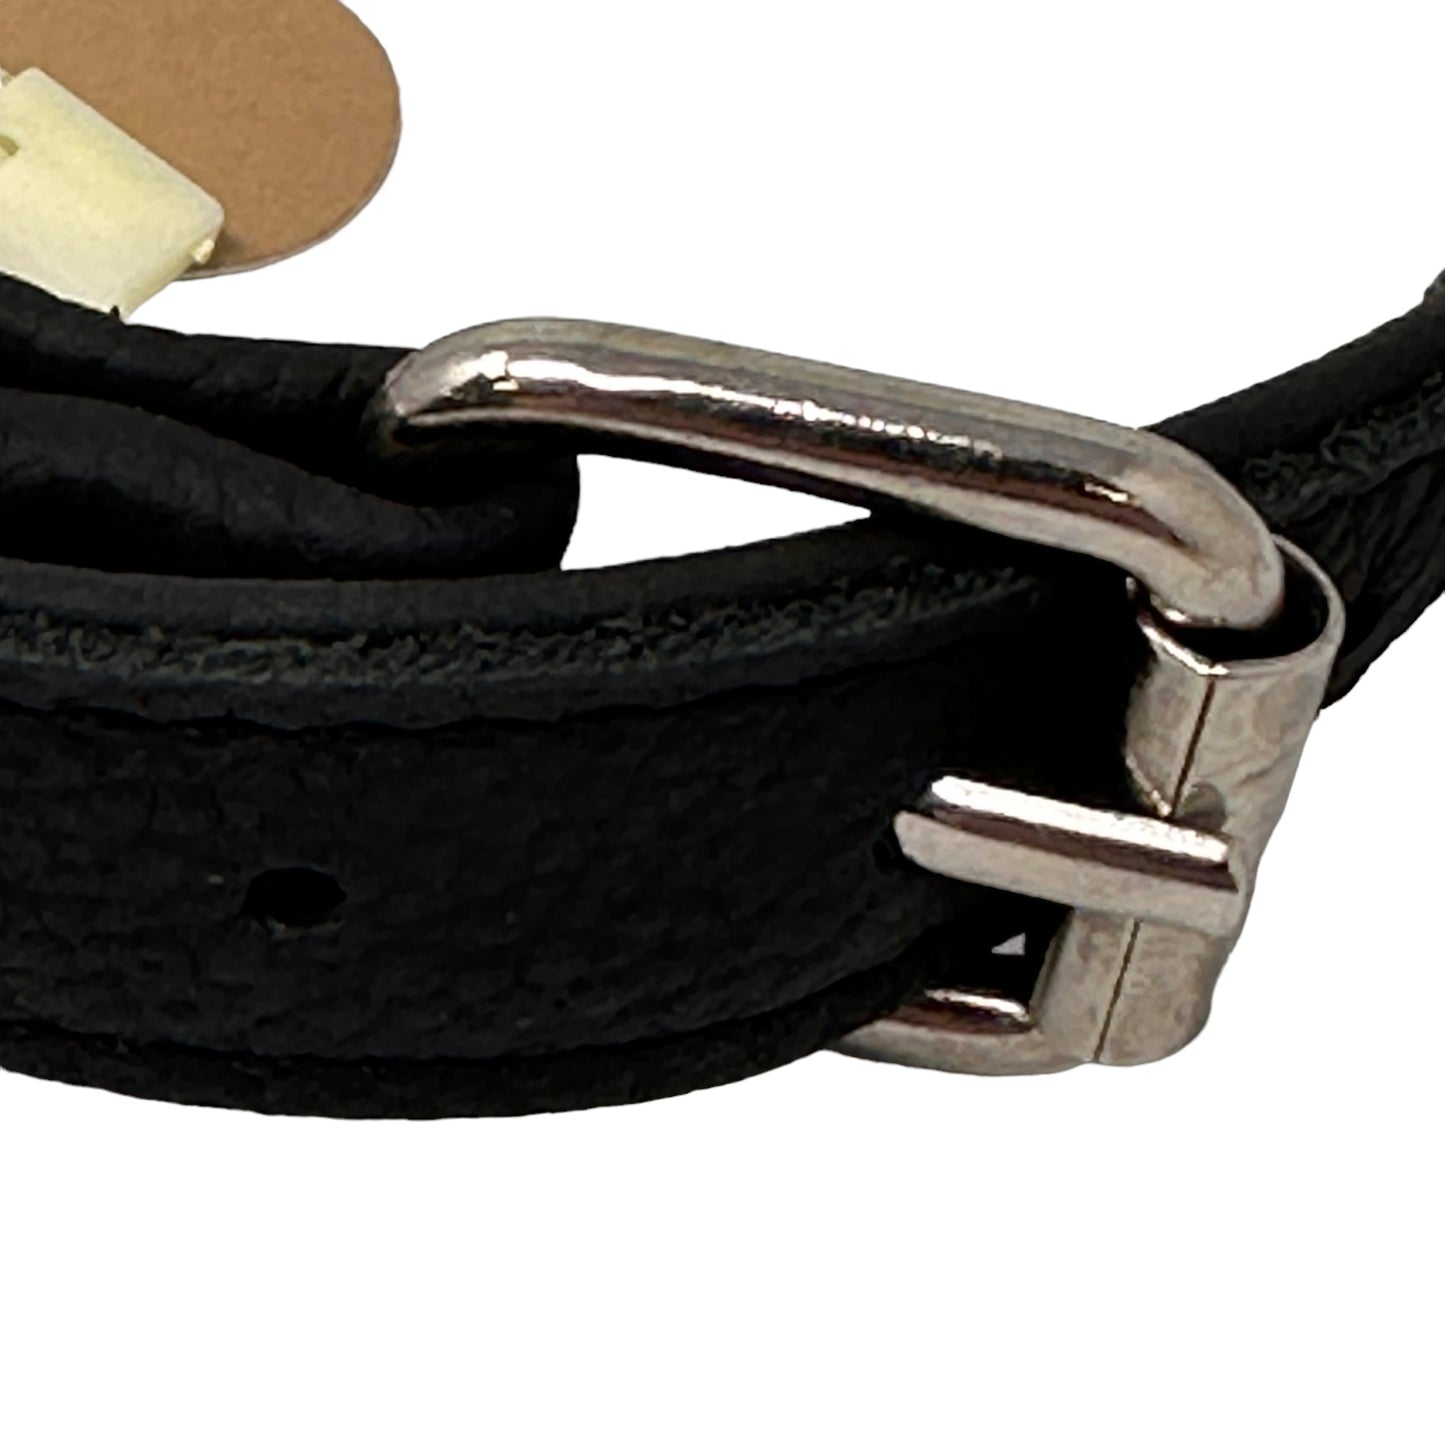 Rolled Leather Dog Collar Medium and Large Breeds - Soft and Padded Round Luxury Design W1/2" - L19-22, Black